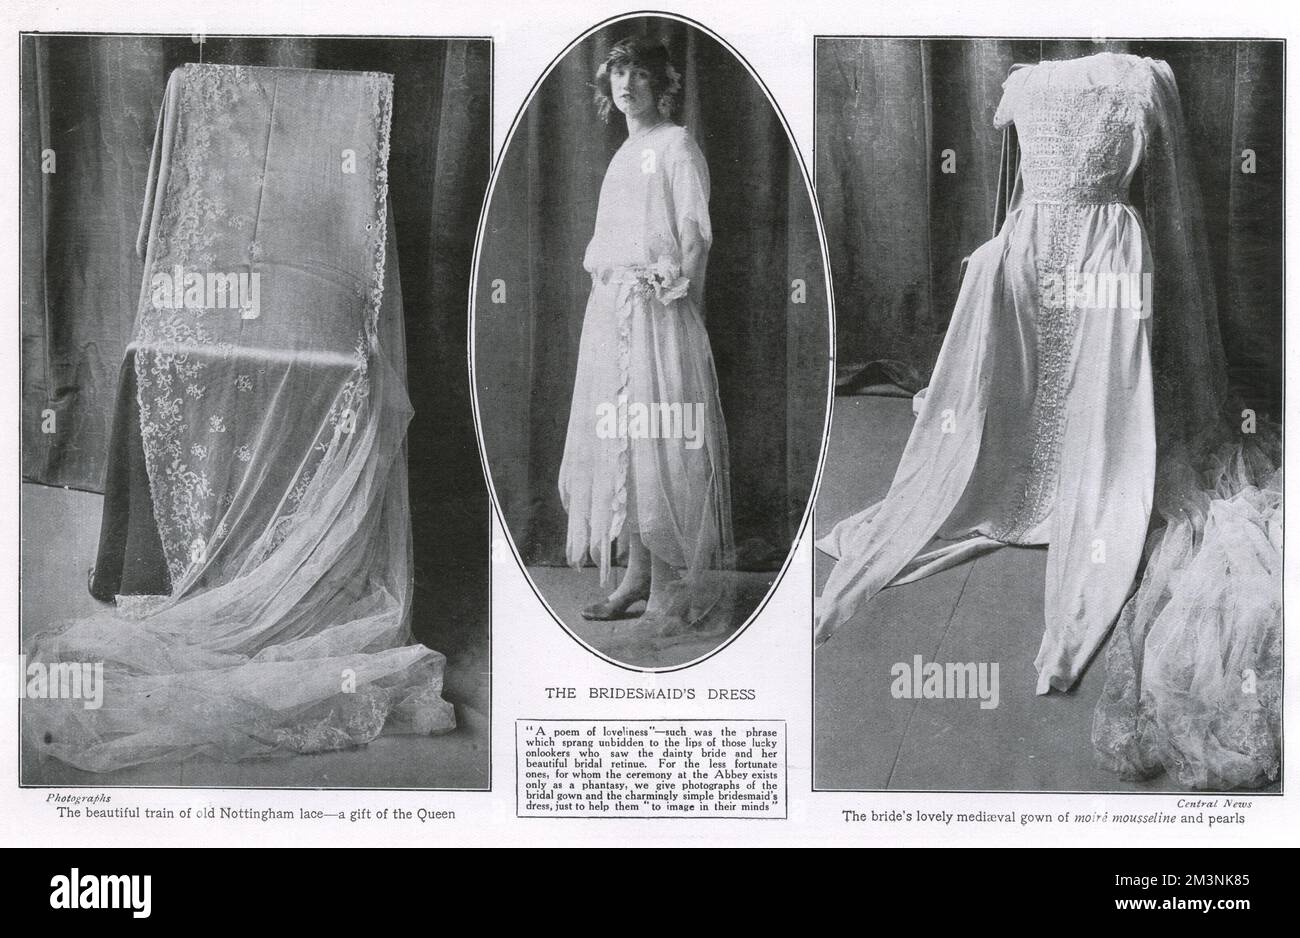 Photographs of the bridal gown and bridesmaid's dress worn at the wedding of Prince Albert, Duke of York to Lady Elizabeth Bowes-Lyon at Westminster Abbey on 26 April 1923.  The wedding dress, designed by Handley Seymour was medieval in style, of moire mousseline with a knife pleated train and centred silver lame, stiffly fringed with pearls and silver beads.  The train of old Nottingham lace was a gift from Queen Mary.  The bridesmaid dresses were of ivory chiffon over crepe de Chine with floating panels of chiffon, appliqued leaves of silver lame and girdled silver foliage, caught at one sid Stock Photo